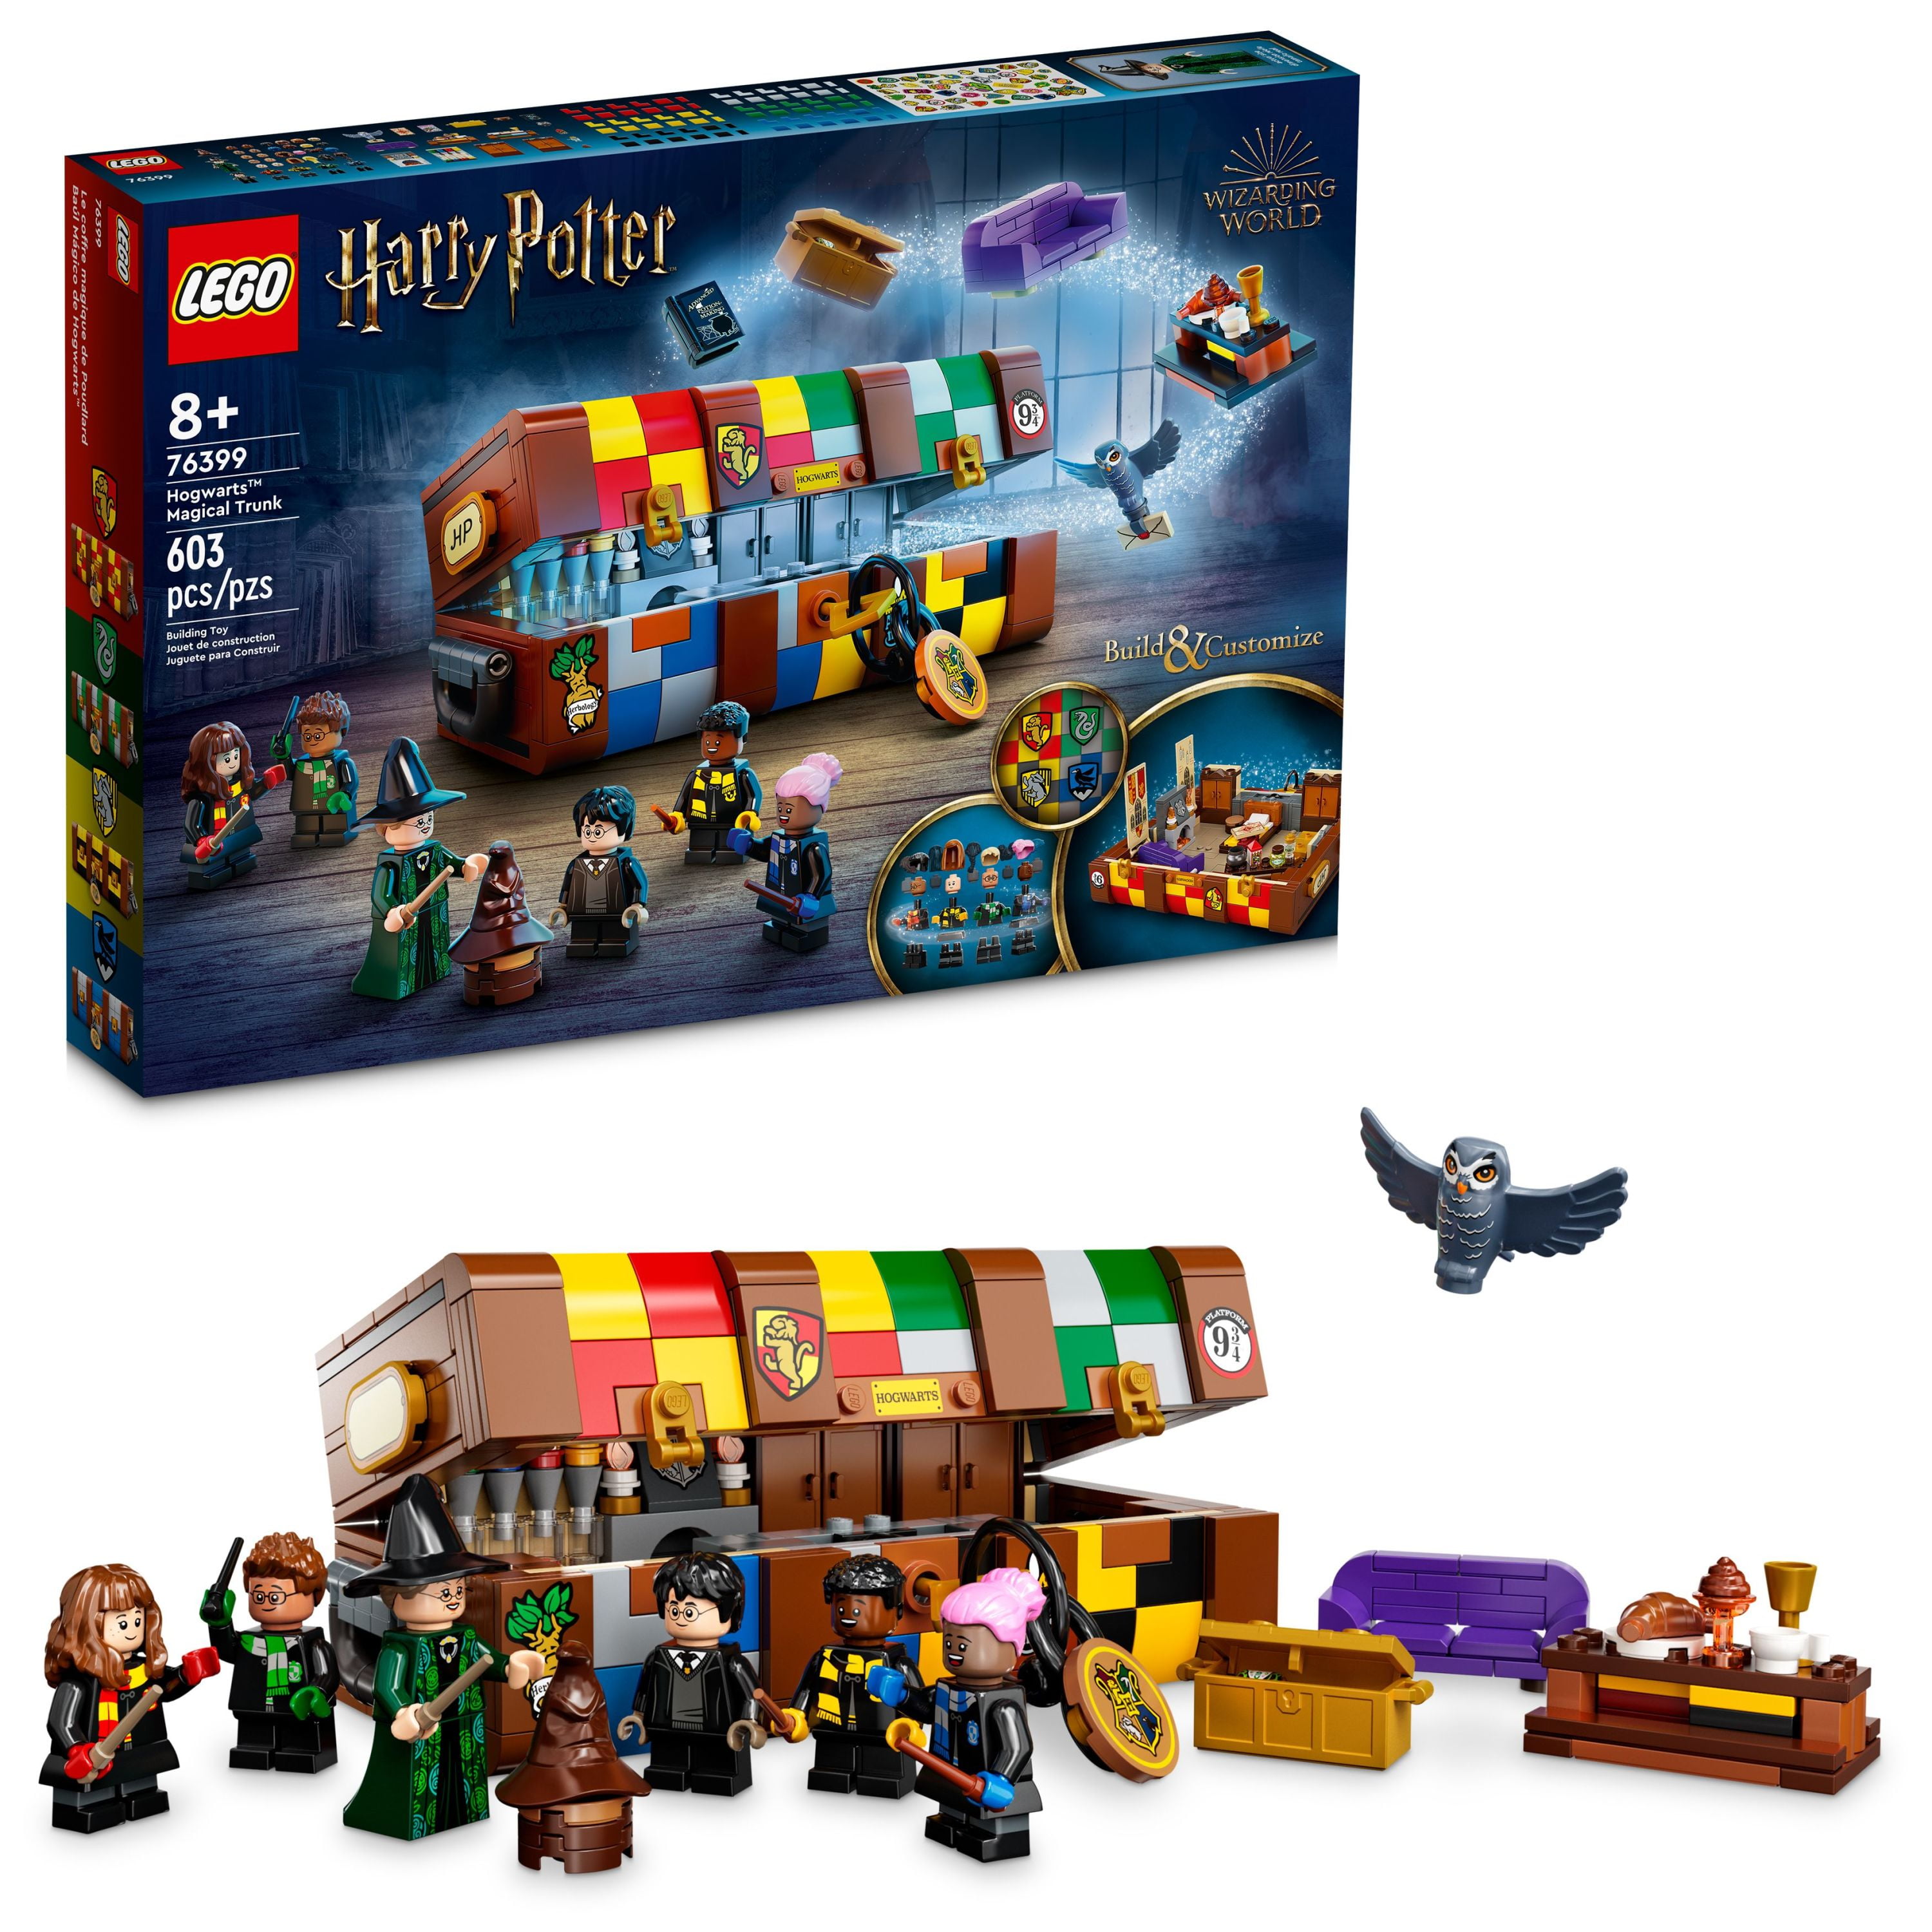 LEGO Harry Potter Hogwarts Magical Trunk 76399 Luggage Set, Personalisable Toy, Gift Idea for Kids, Girls & Boys with Movie Minifigures and House Colors